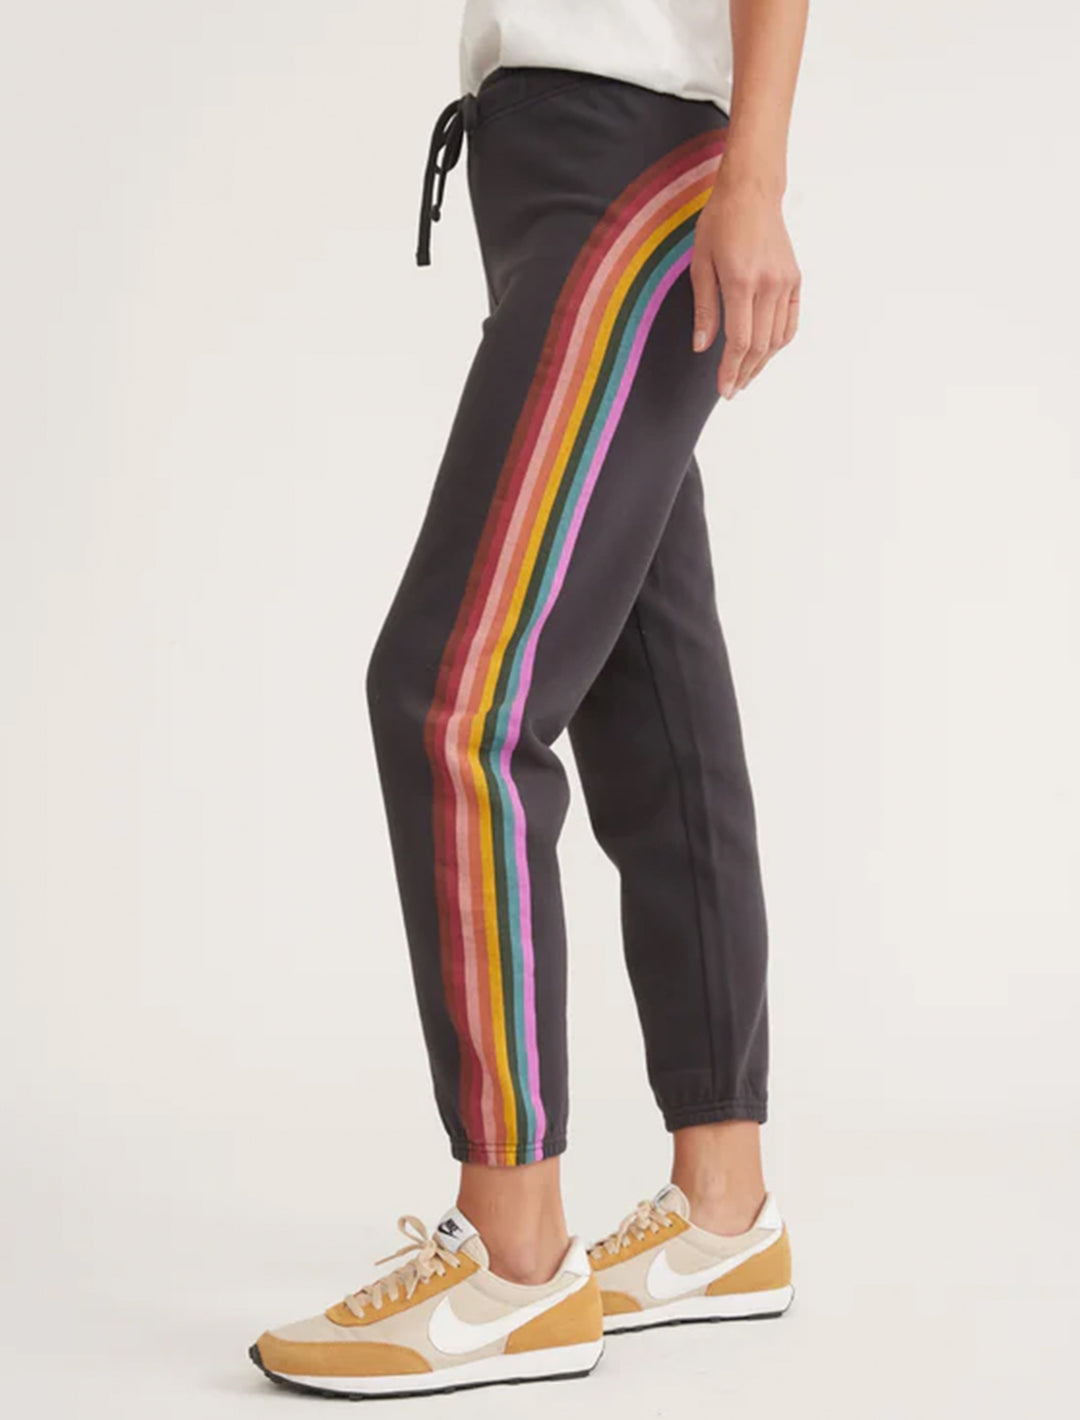 Model wearing Marine Layer's anytime sweatpant in washed black.